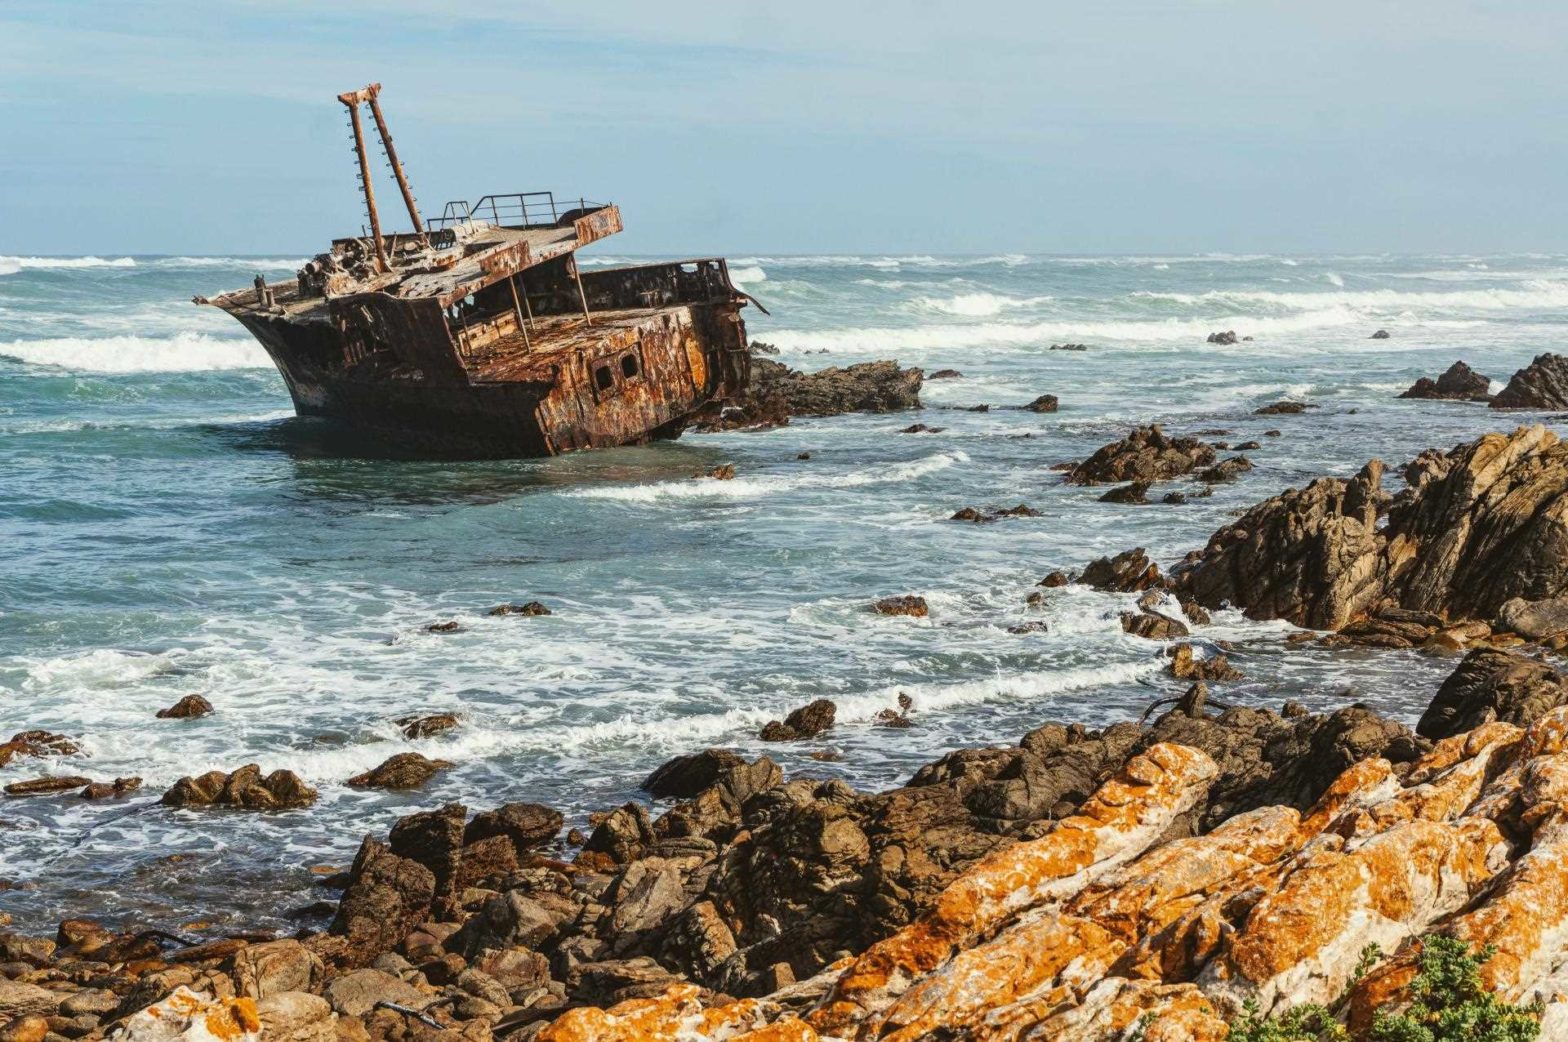 Shipwreck at Agulhas National Park, South Africa.